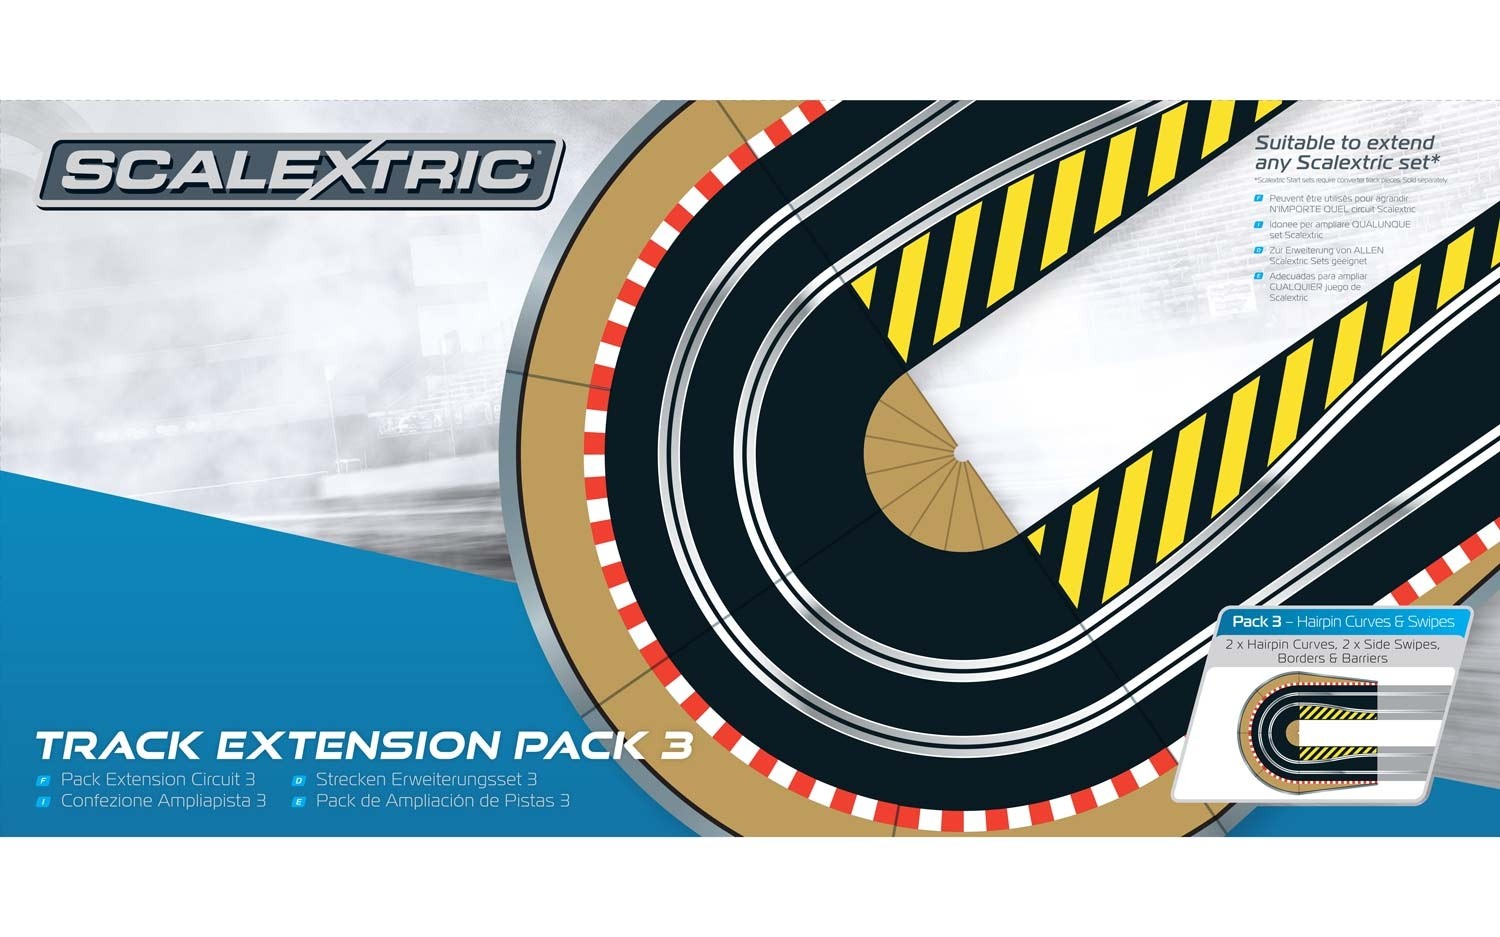 Track Extension Pack 3 